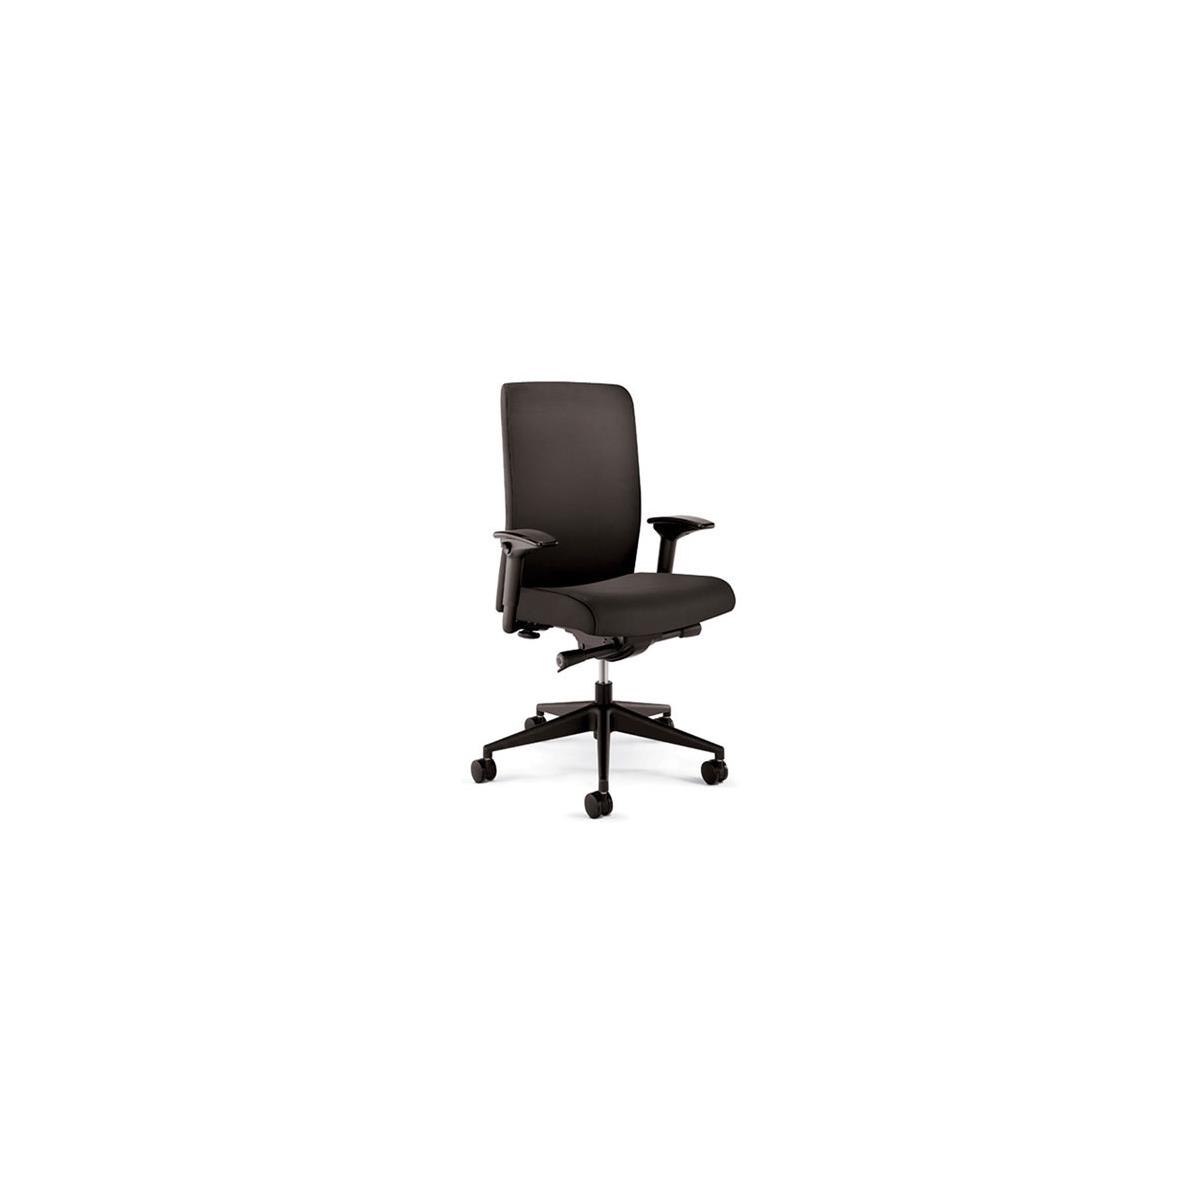 Image of Winsted 11745 24/7 High-Back Chair